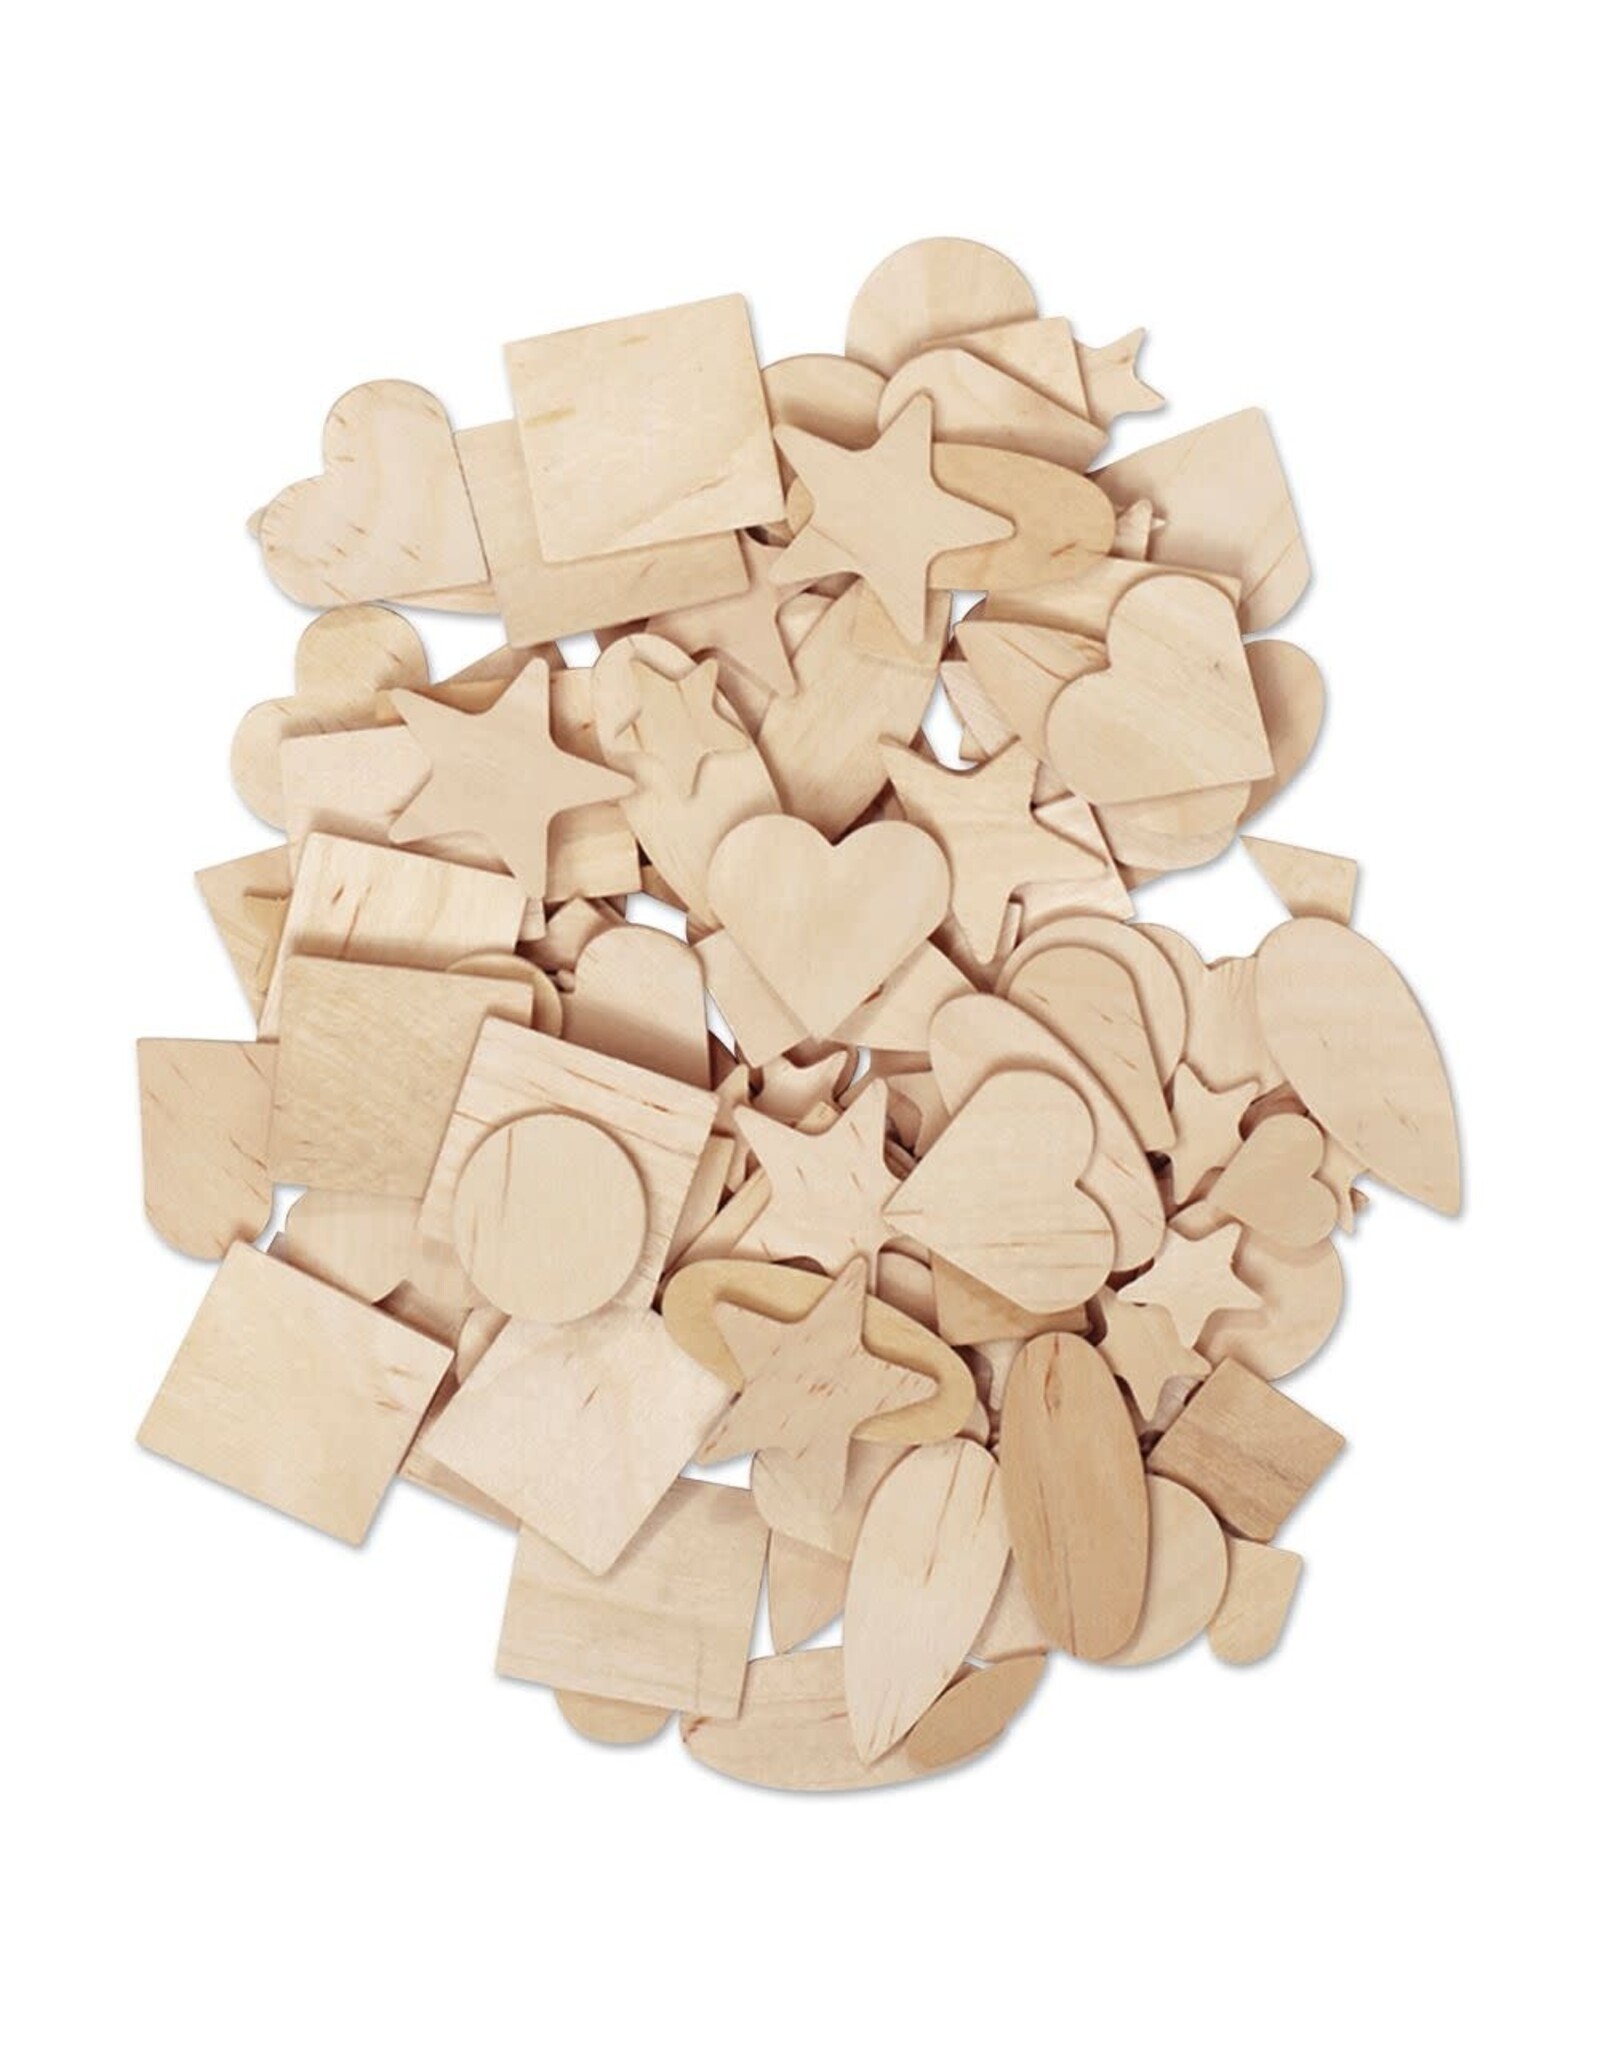 WOOD SHAPES: ASSORTED DESIGNS 1,000 PACK